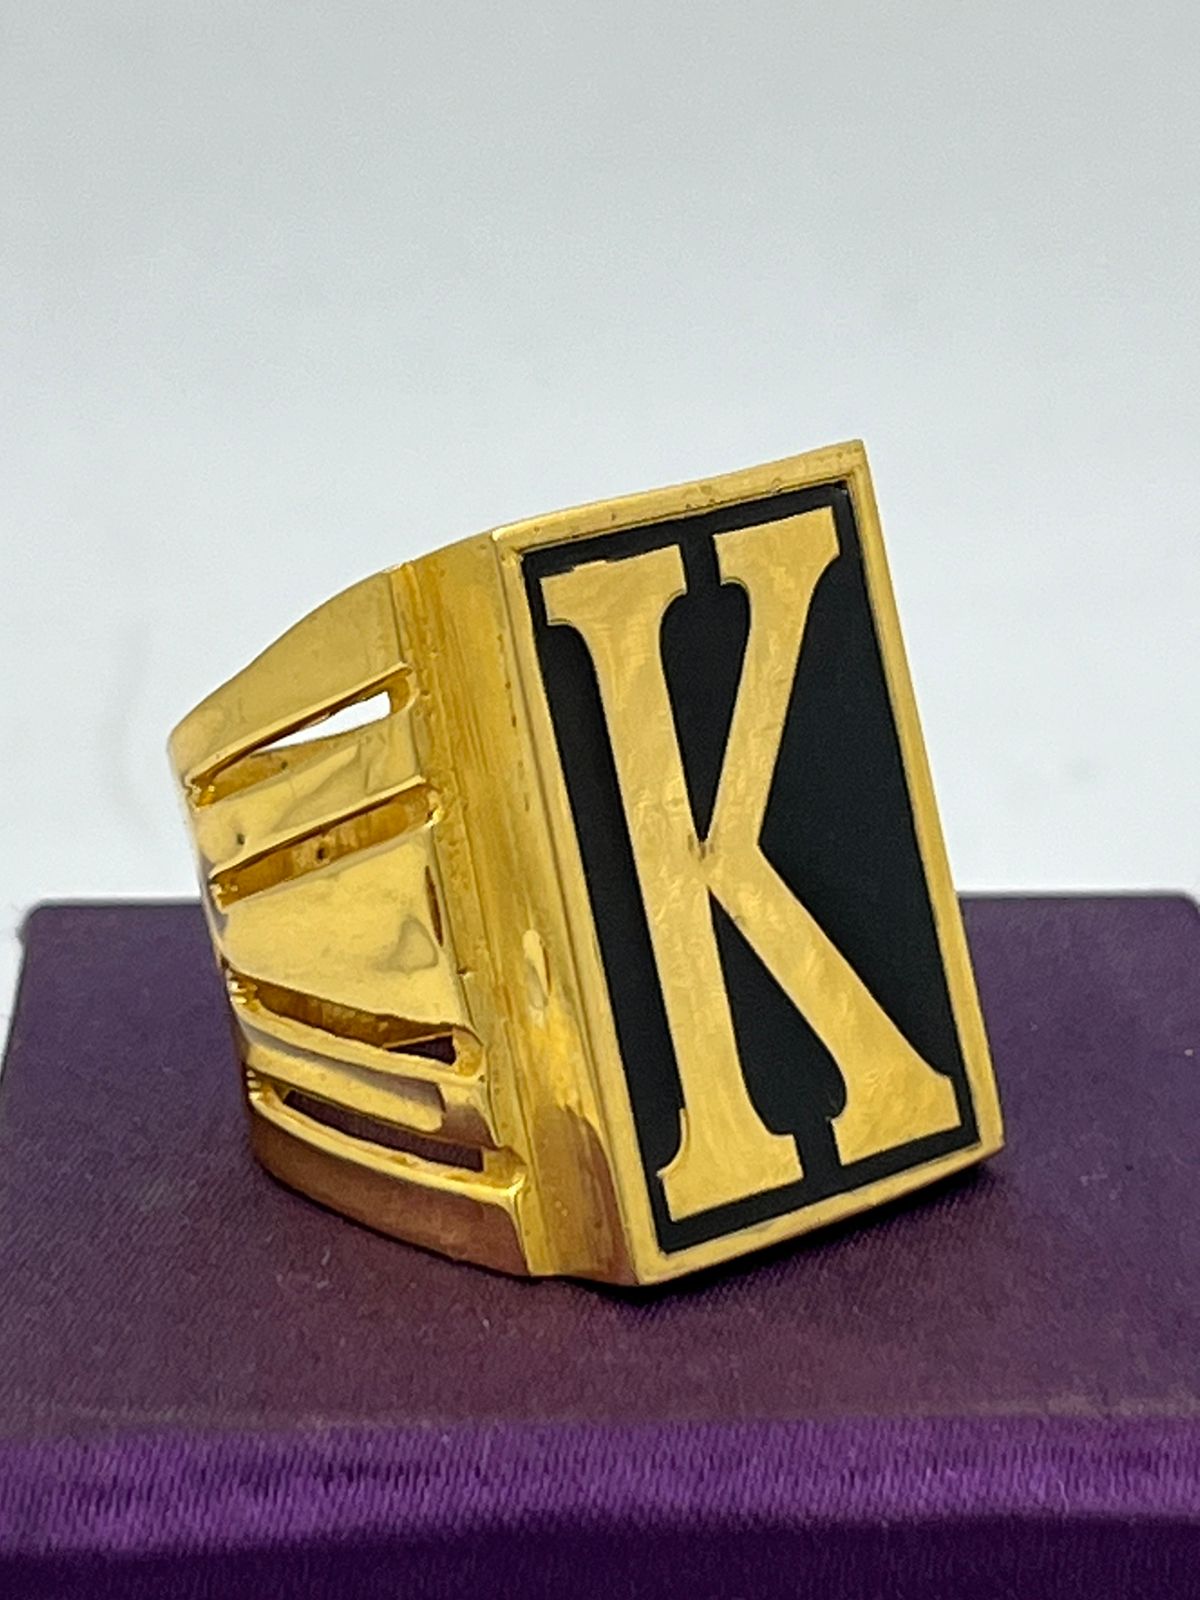 Buy Kanak Jewels Valentine Gift Initial Letter K ring for Girls stylish  design gold plated ring at Amazon.in